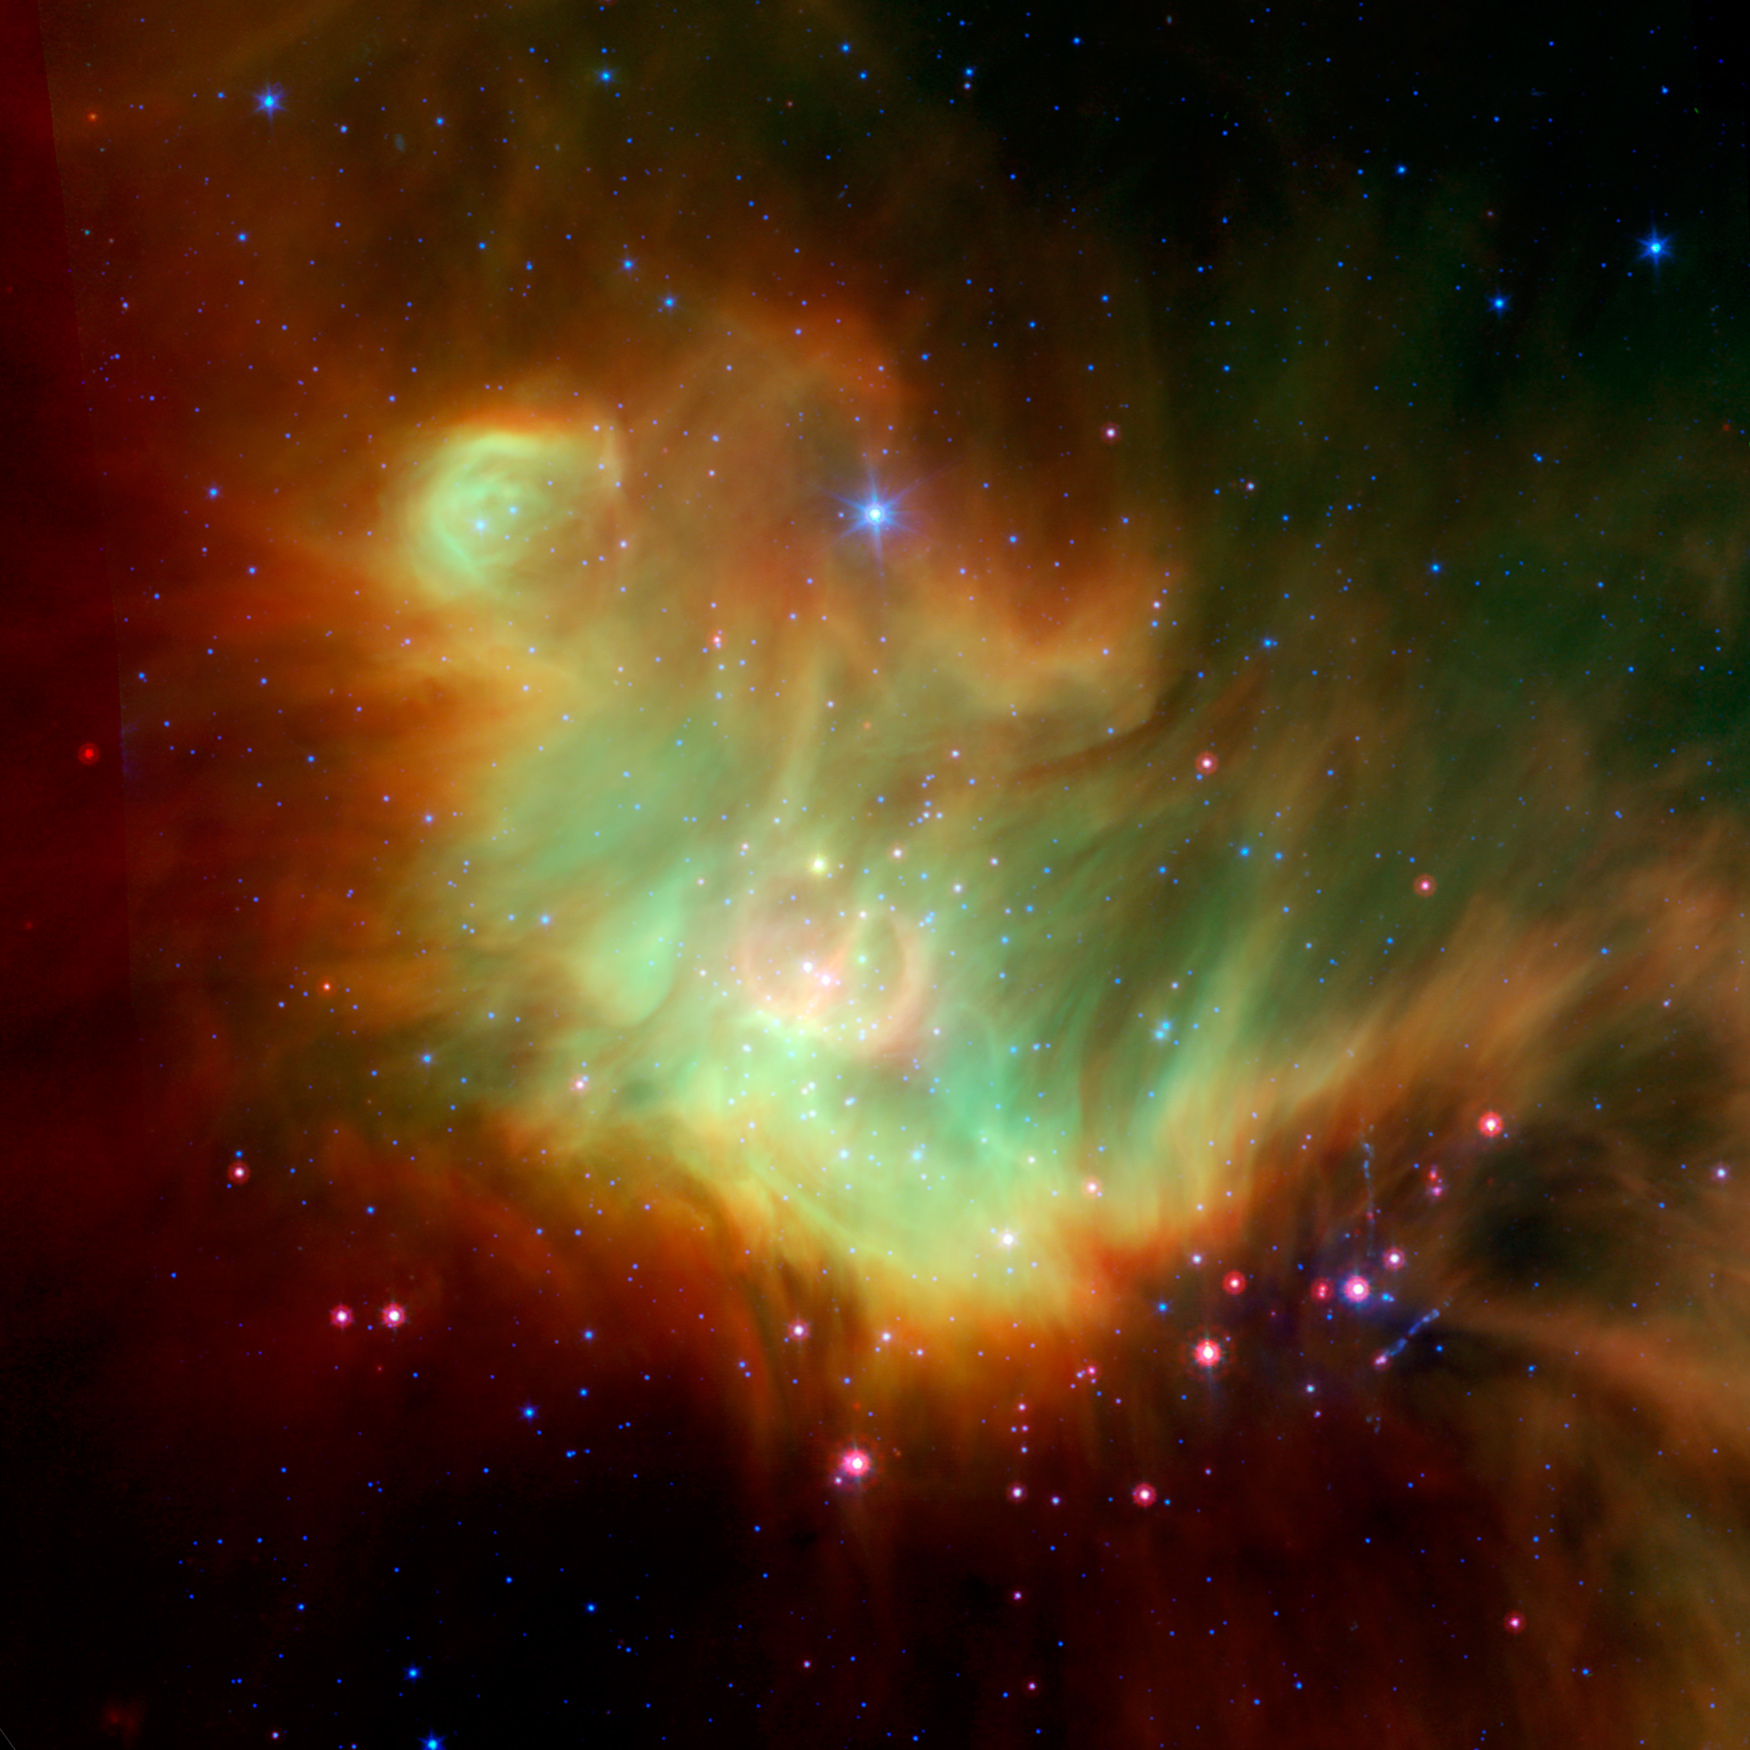 Spitzer space telescope observations reveal unusual infant binary star